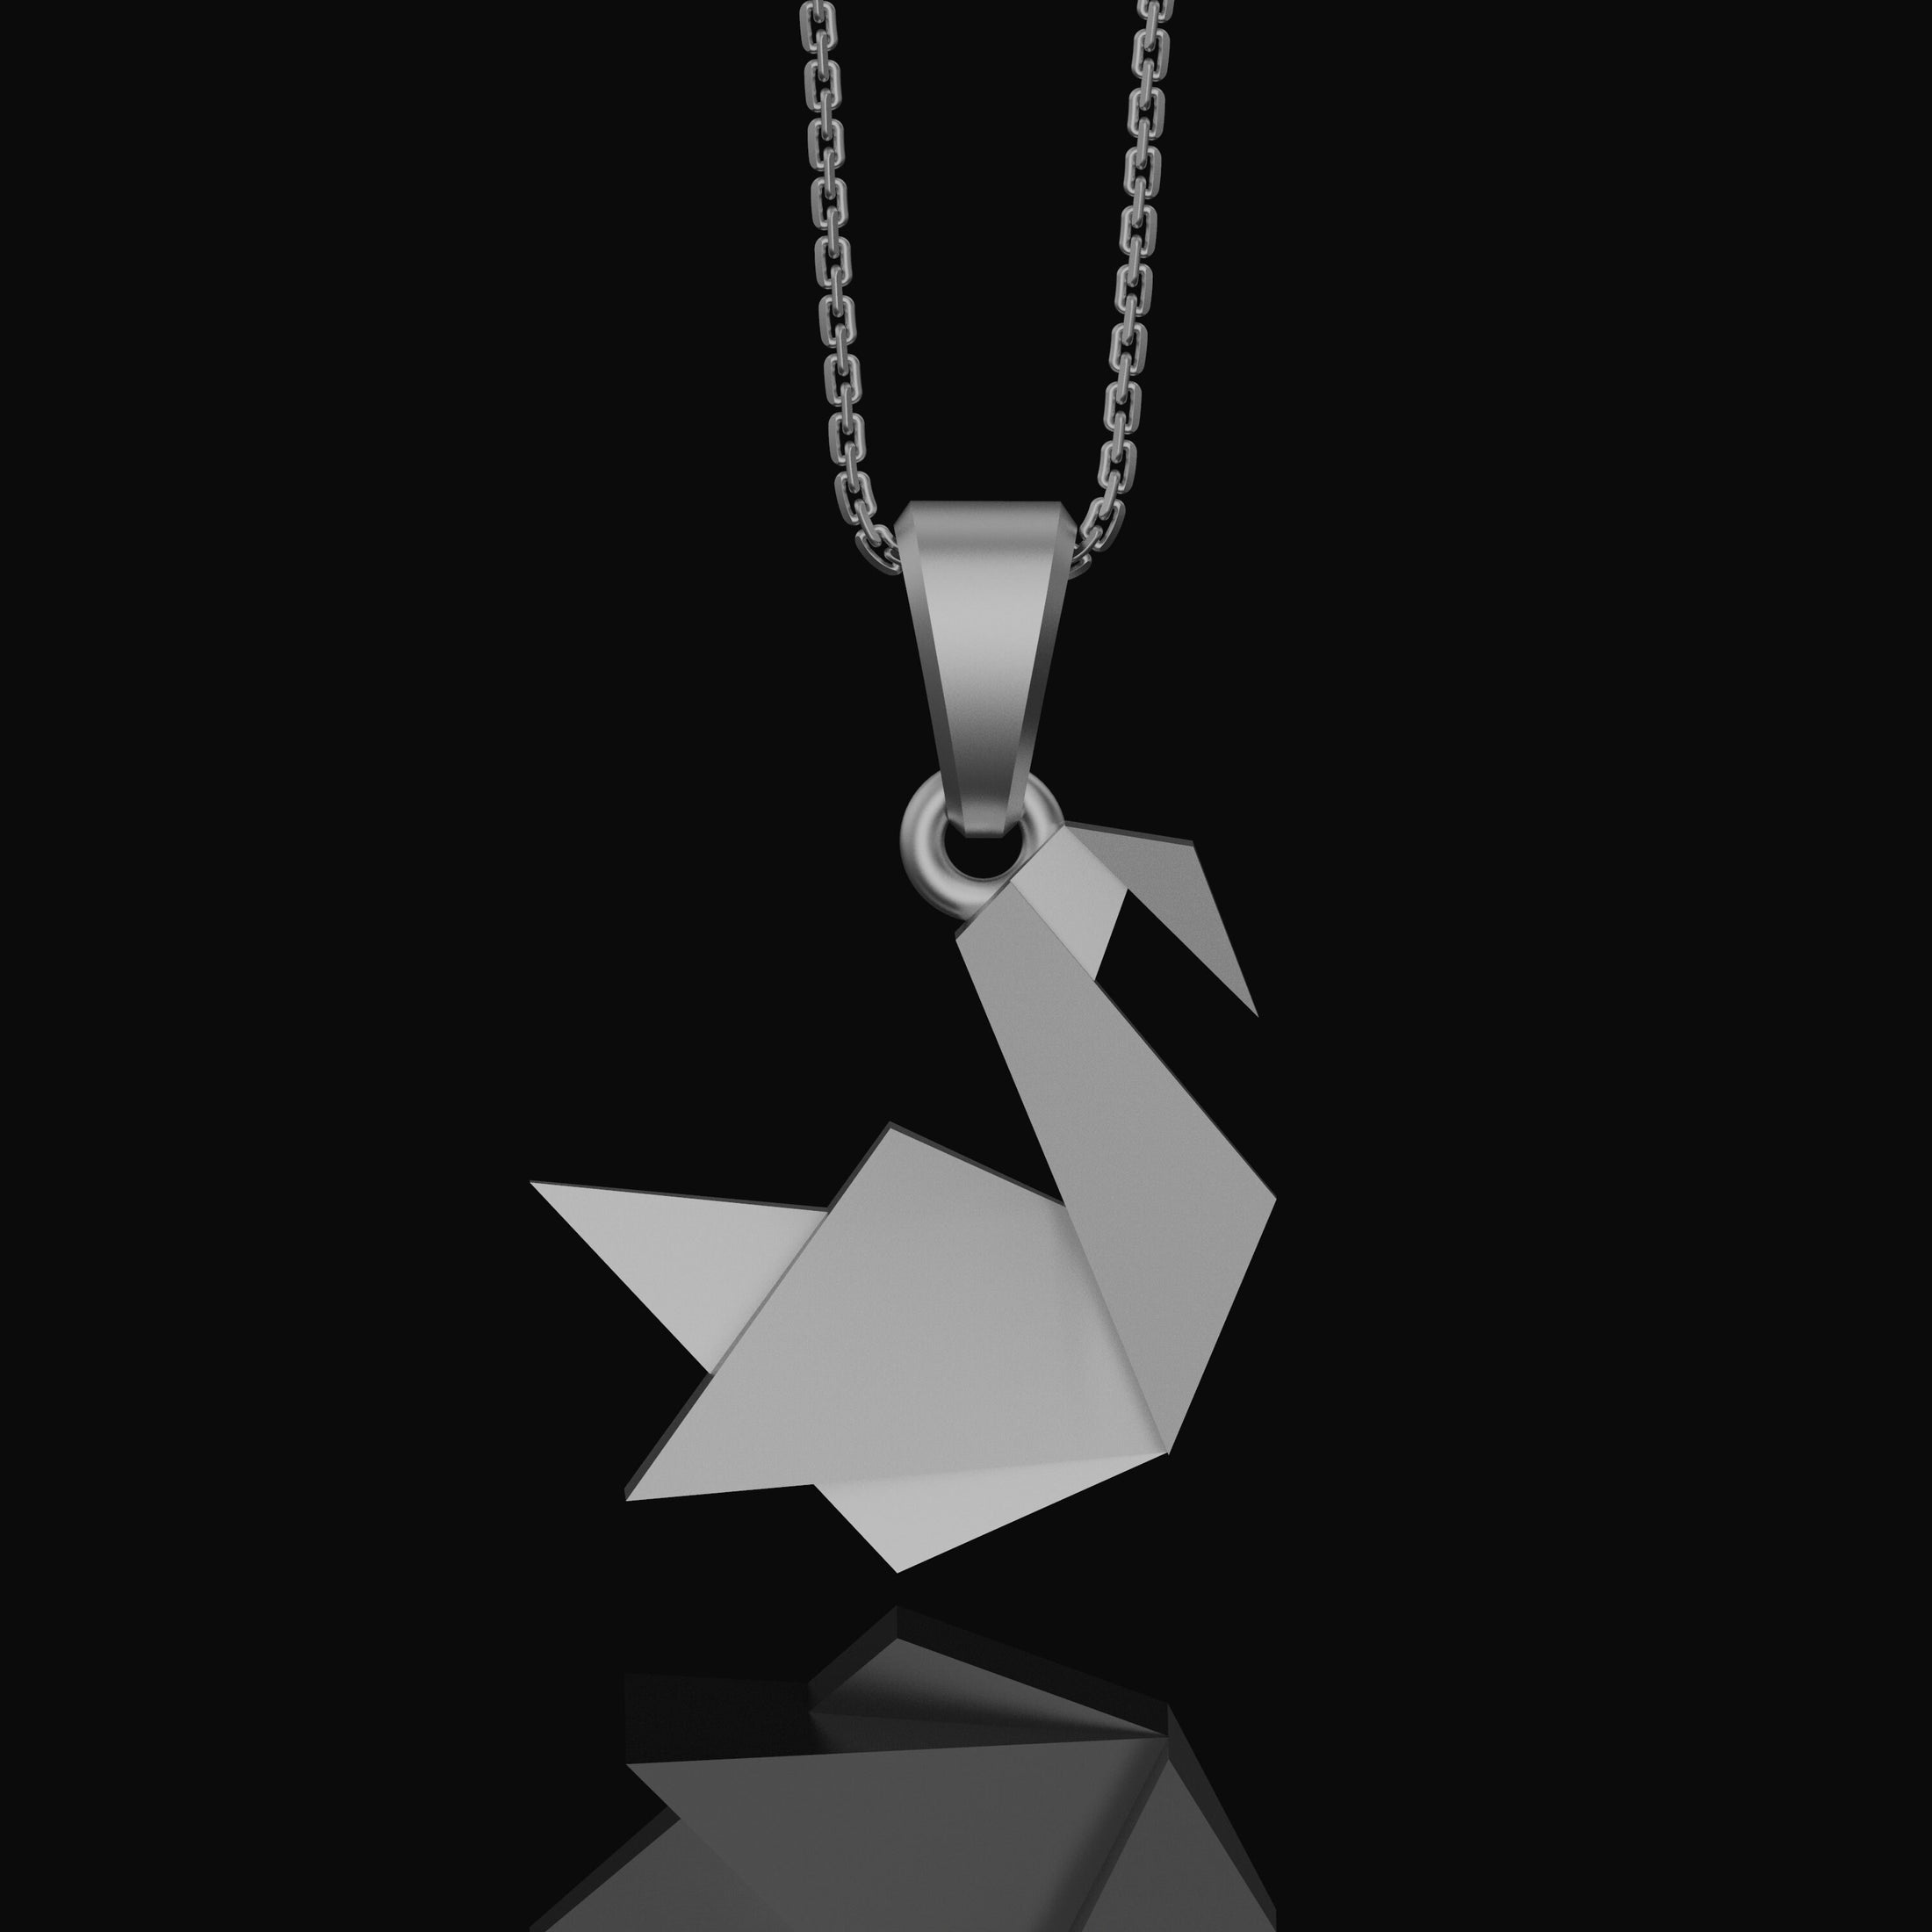 Silver Origami Swan Charm Necklace - Elegant Folded Swan Pendant, Chic and Artistic, Graceful Nature-Inspired Jewelry Polished Finish